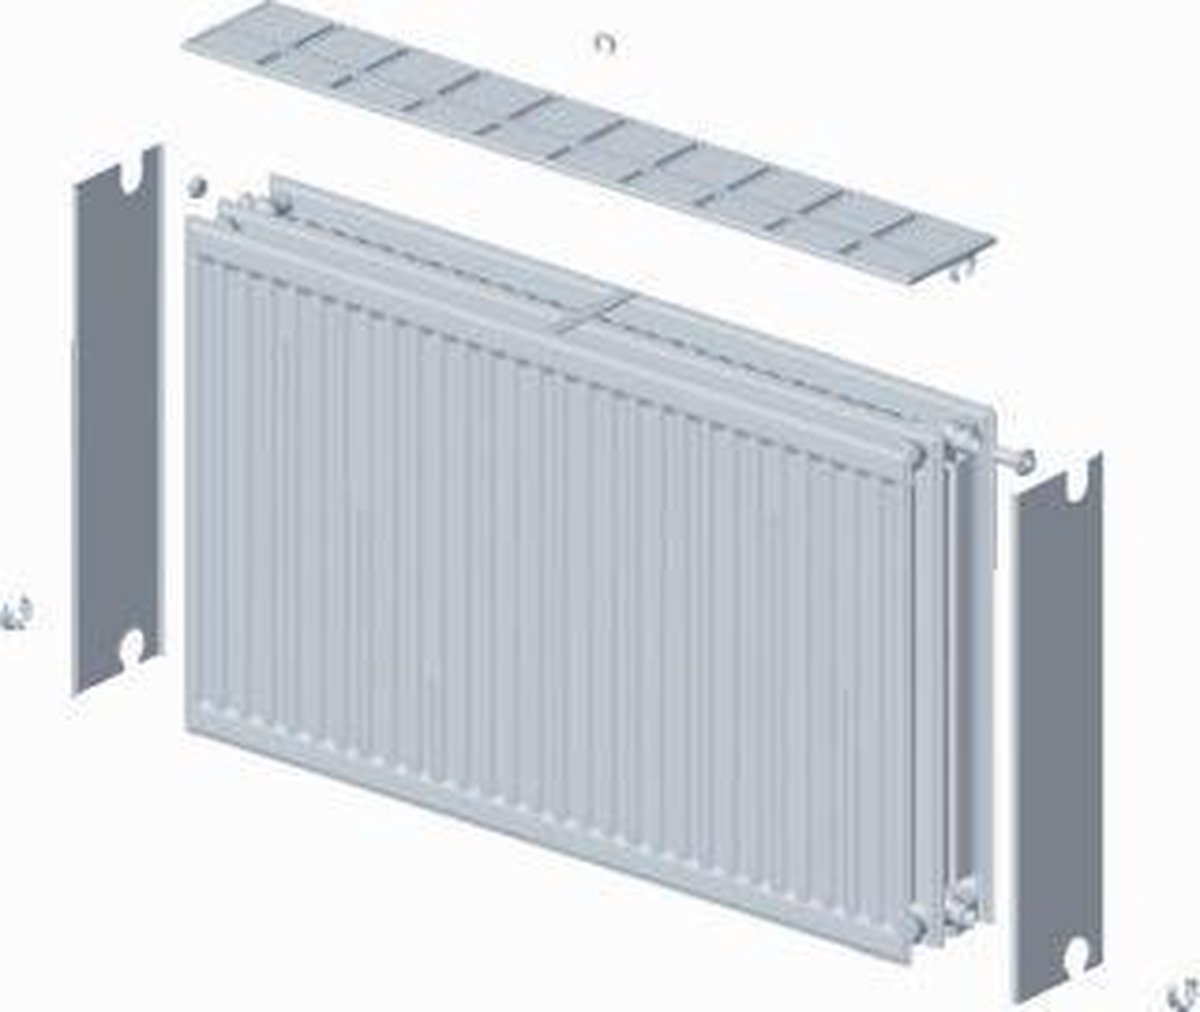 Stelrad paneelradiator Novello, staal, wit, (hxlxd) 900x1000x158mm, 33